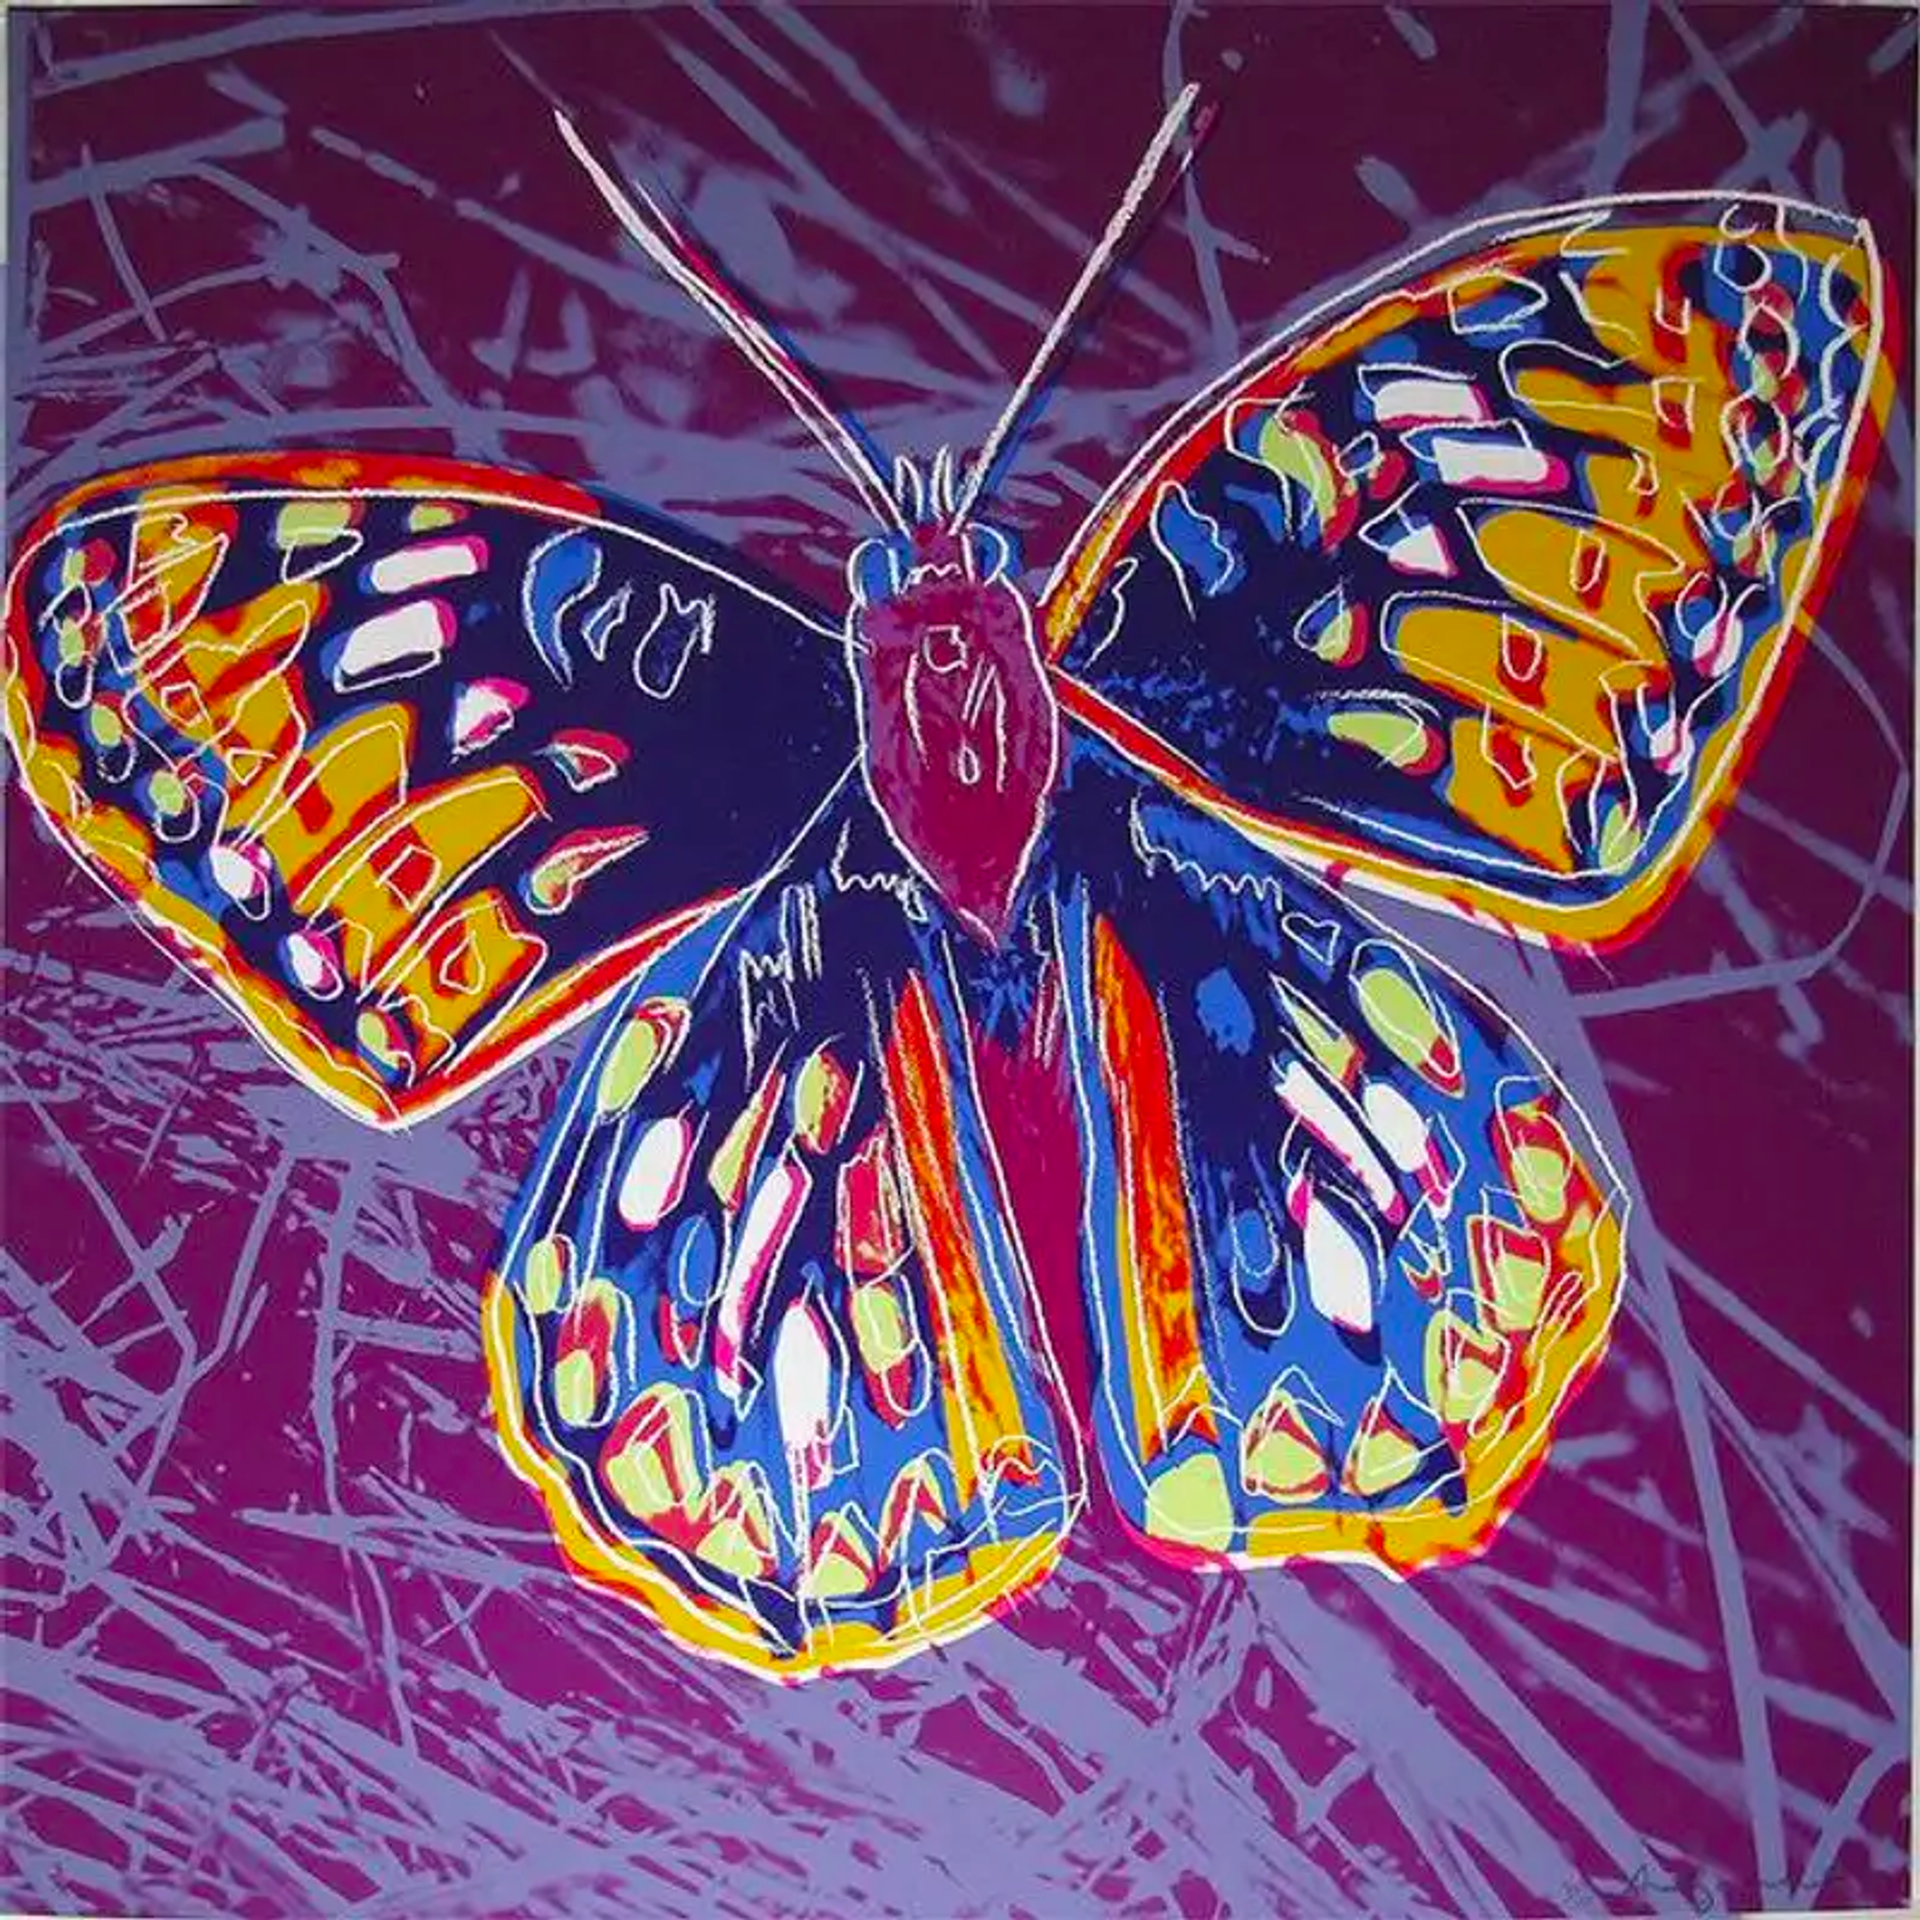 Vibrant Andy Warhol butterfly screenprint on magenta background from the endangered species series.